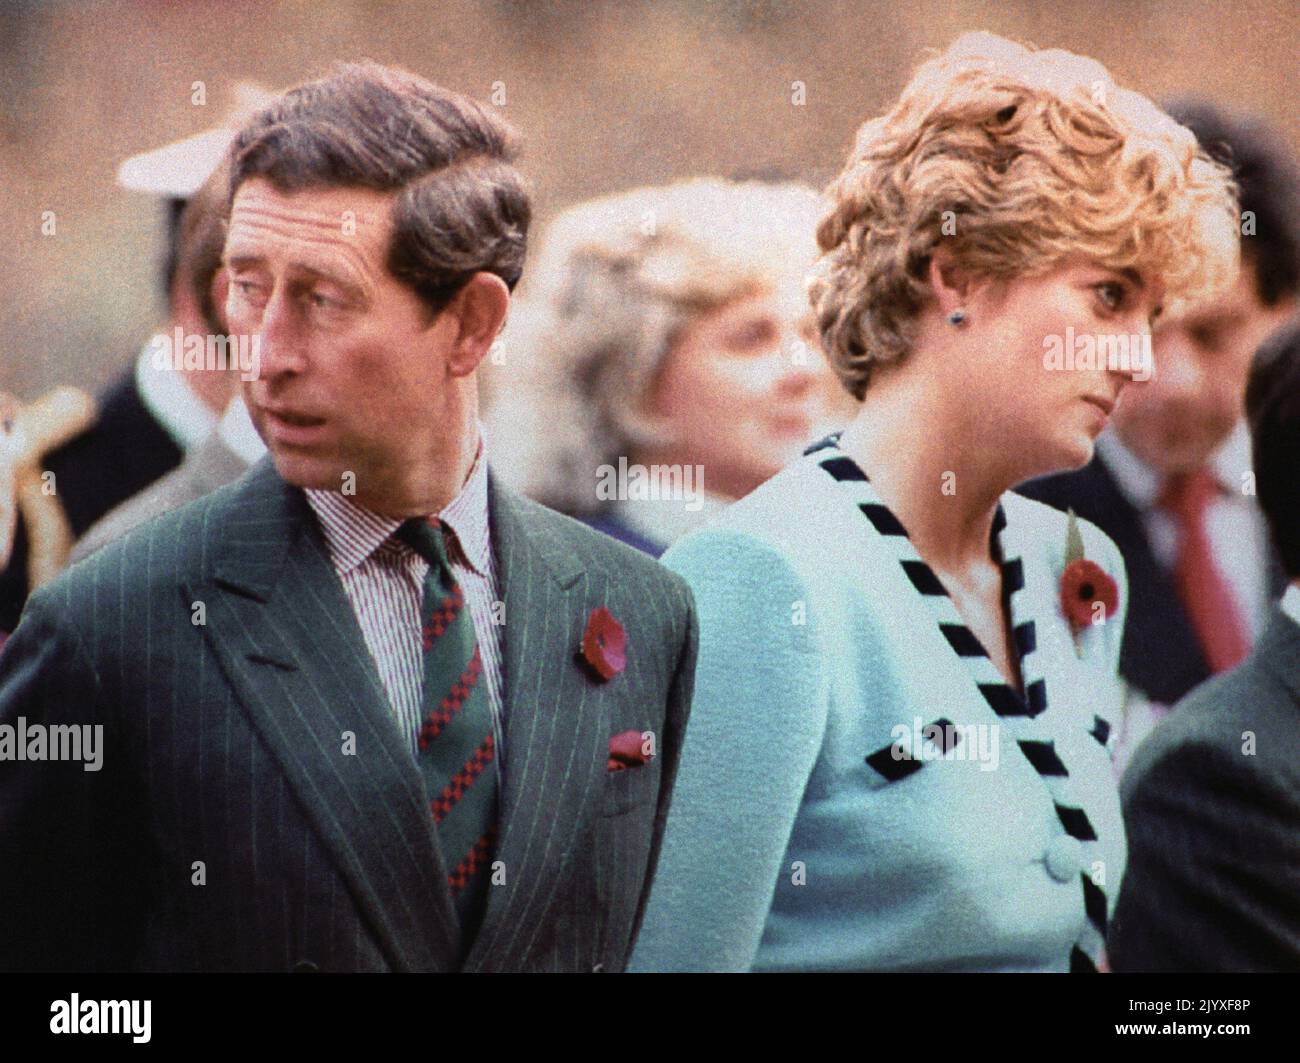 File photo dated 3/11/1992 of the Prince and Princess of Wales looking their separate ways during a memorial service on their tour of Korea. The Queen's Annus Horribilis speech at Guildhall on 24 November, 1992, marking 40 years on the throne, followed a year which had seen the Prince and Princess of Wales at war, the Duke and Duchess of York separated, Princess Anne divorced, Windsor Castle went up in flames and the publication of Andrew Morton's book: 'Diana: Her True Story'. In December the Prince and Princess of Wales formally separated. Issue date: Thursday September 8, 2022. Stock Photo